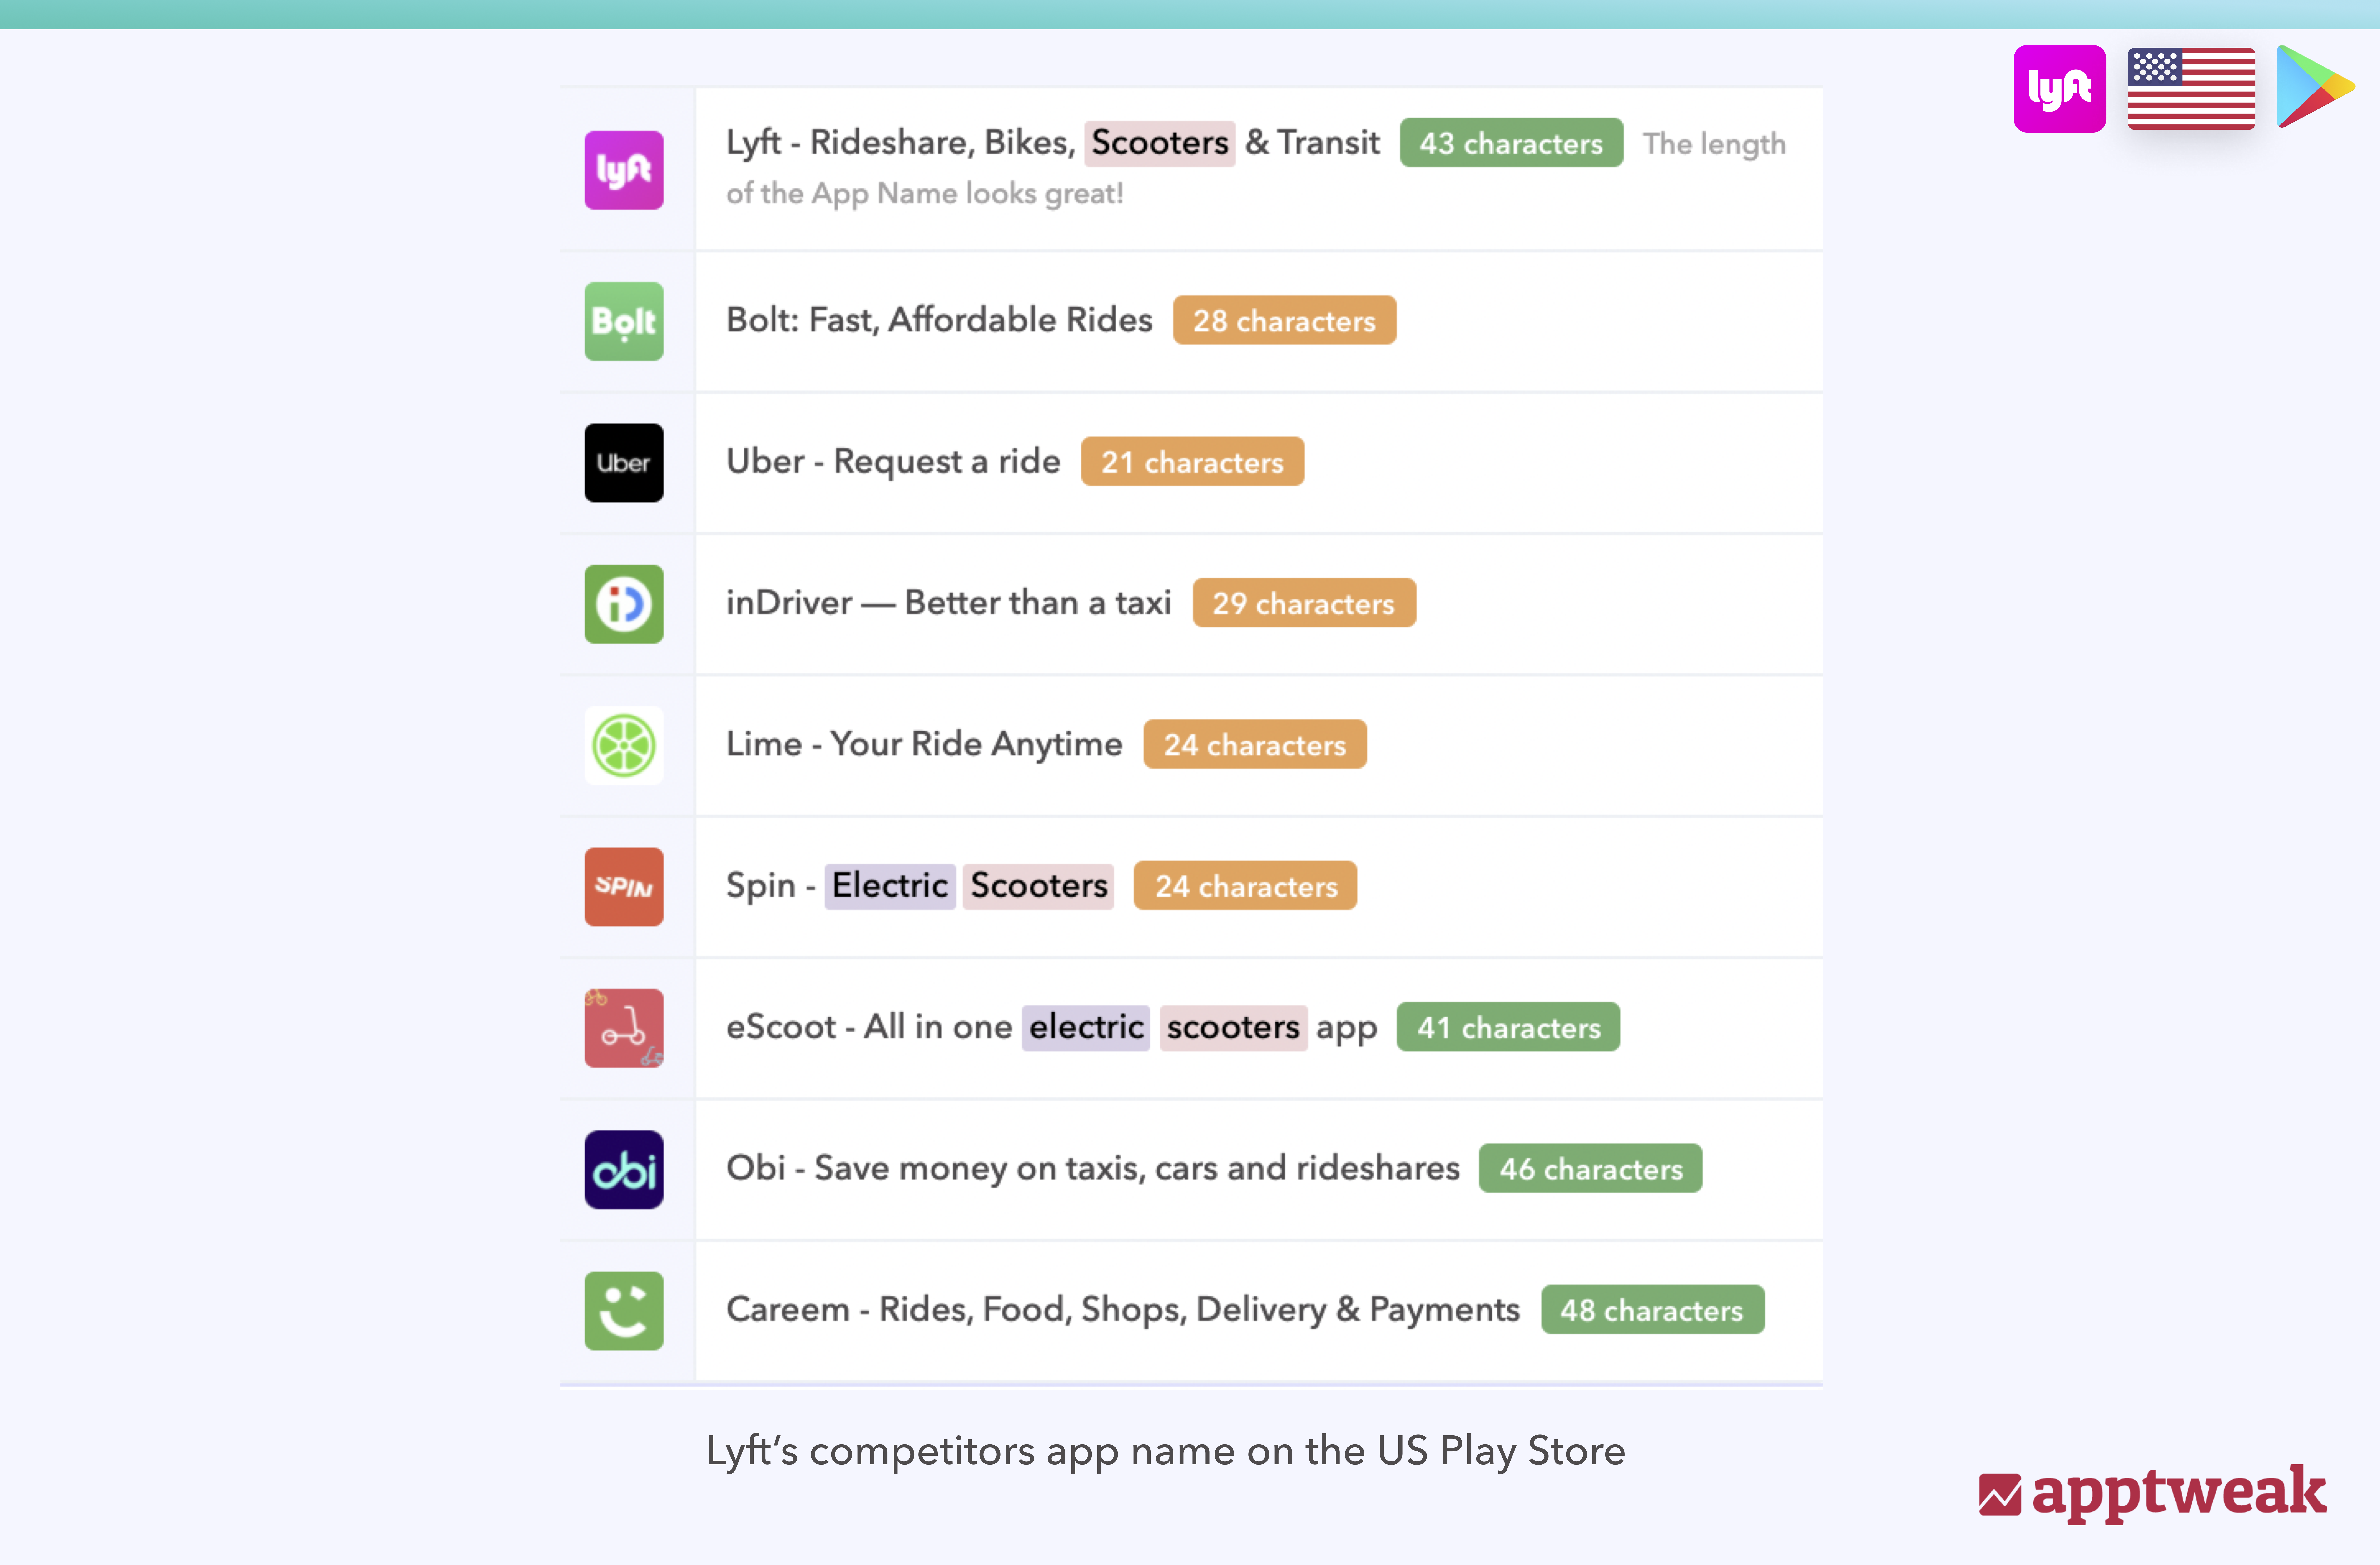 Comparing Lyft's competitors app name on the US Play Store